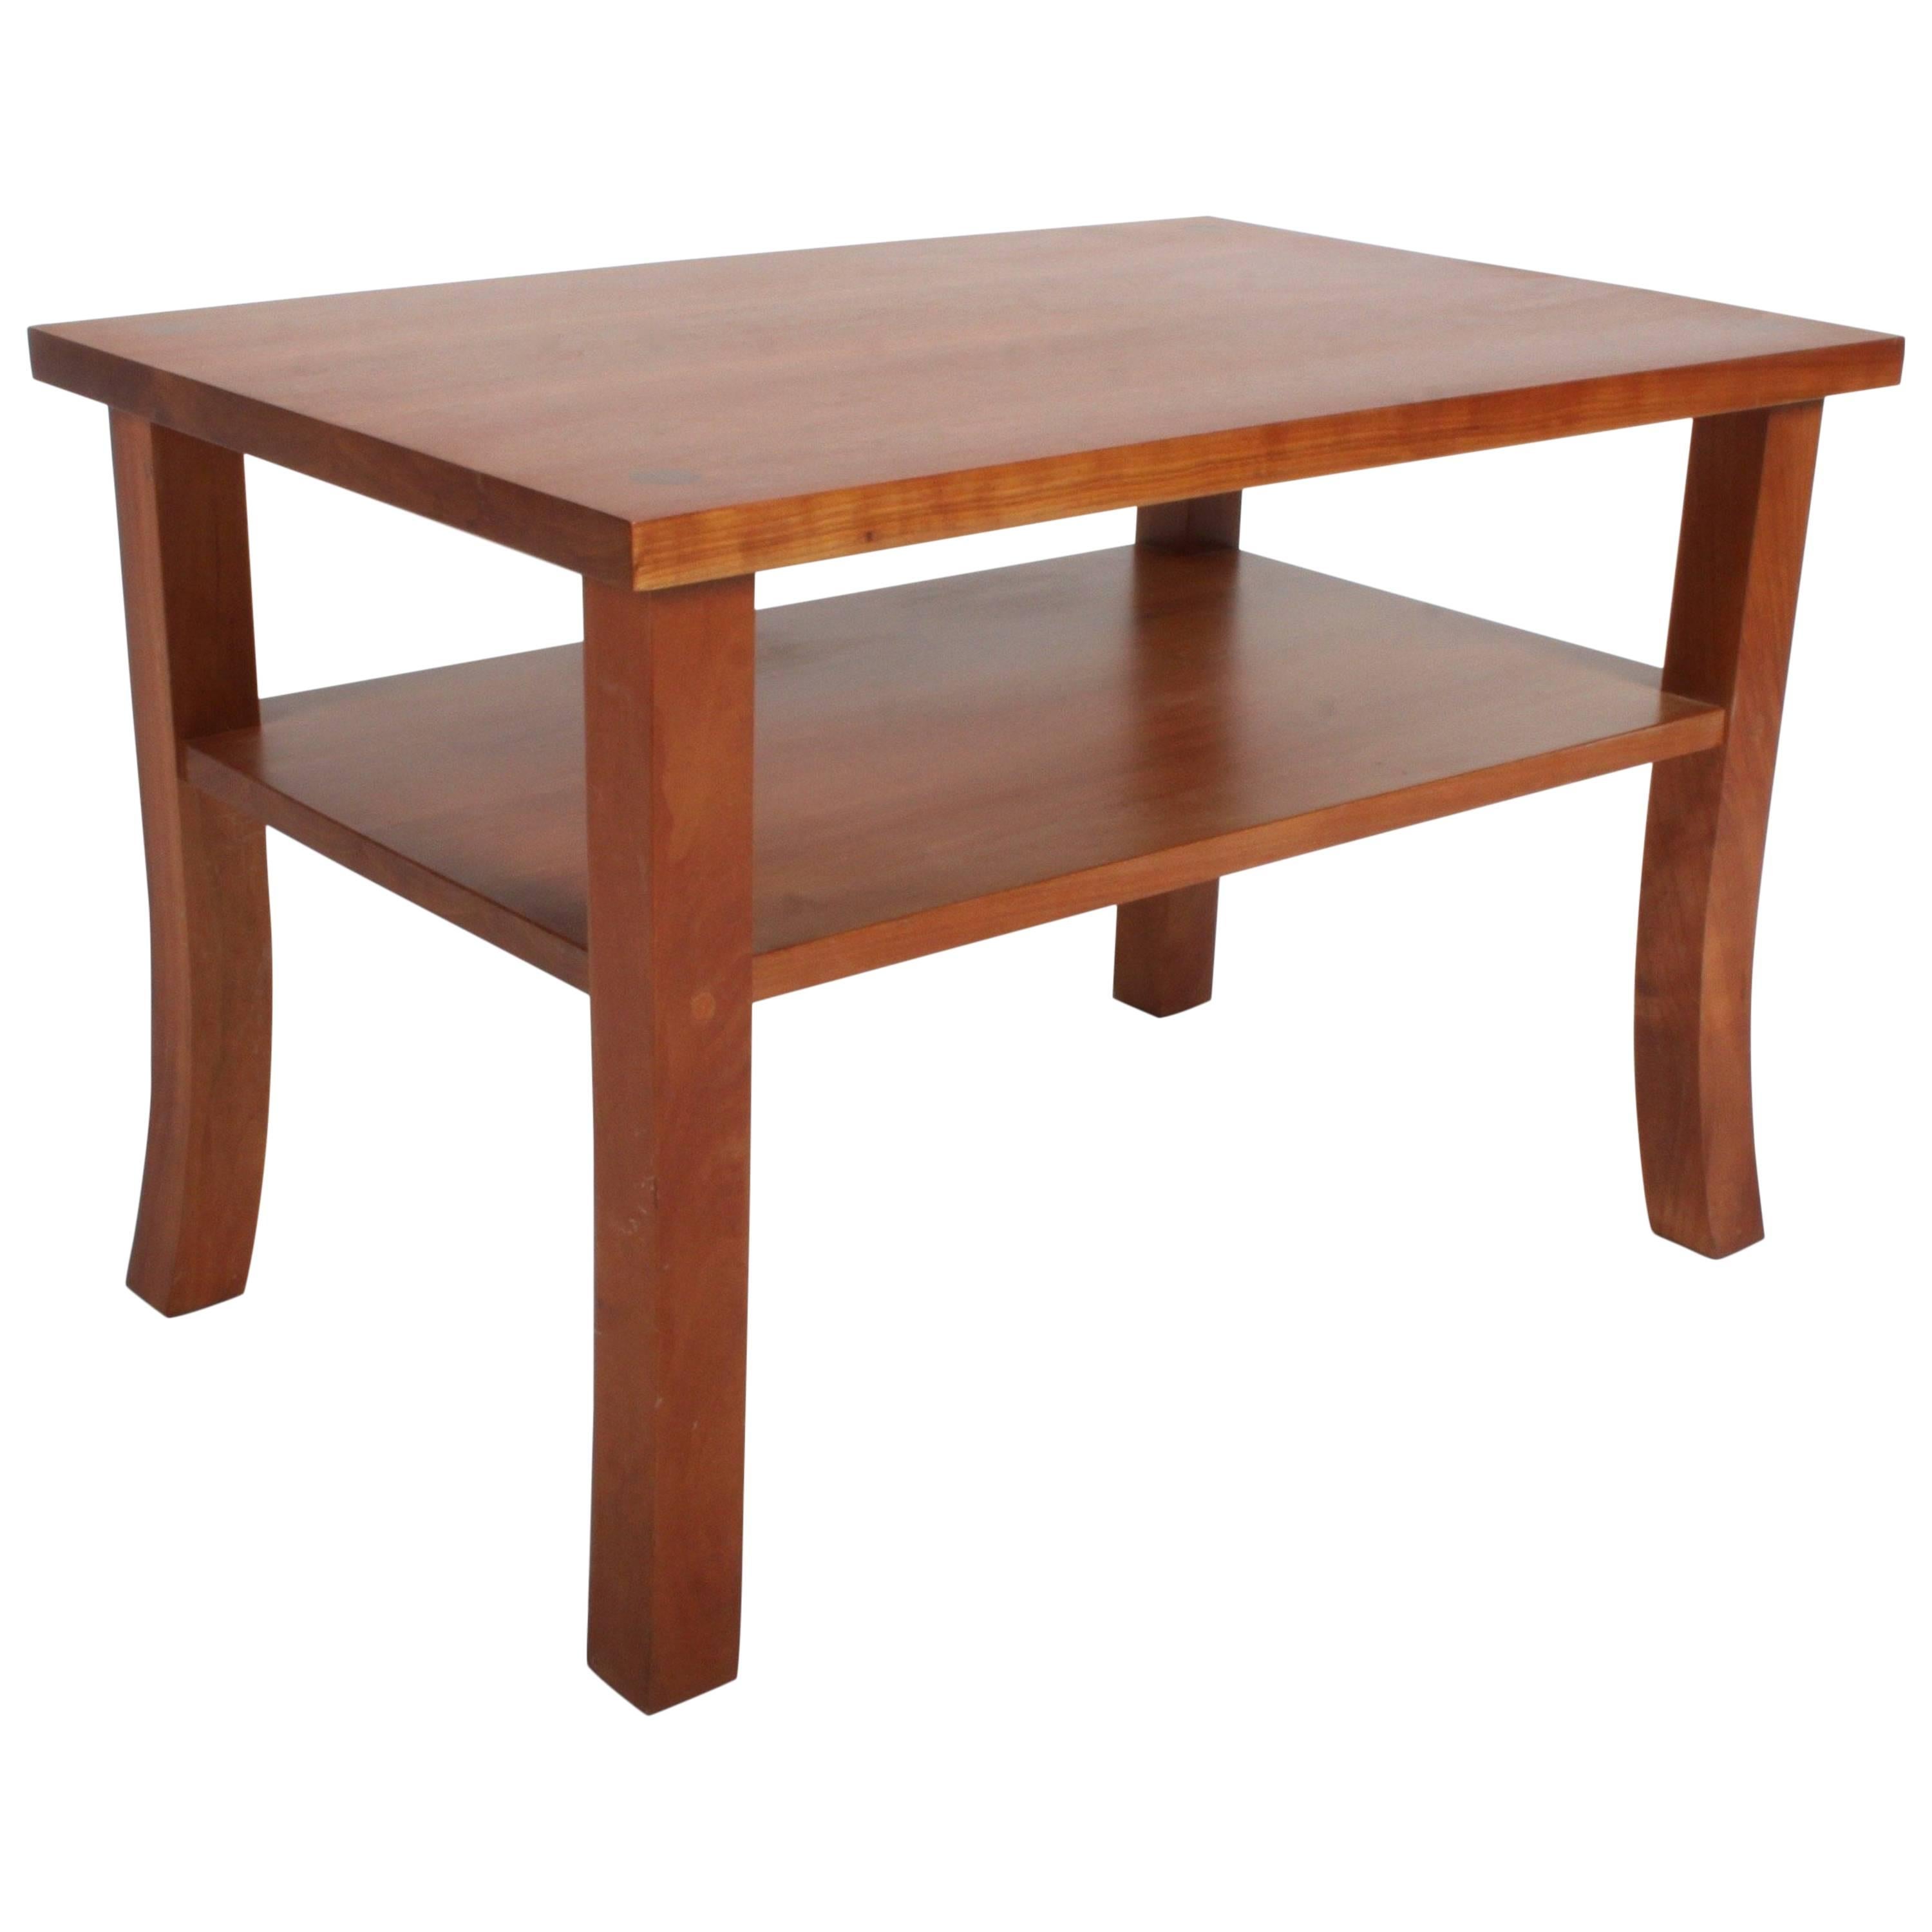 Signed Thomas Moser Lolling Side Table in Cherry